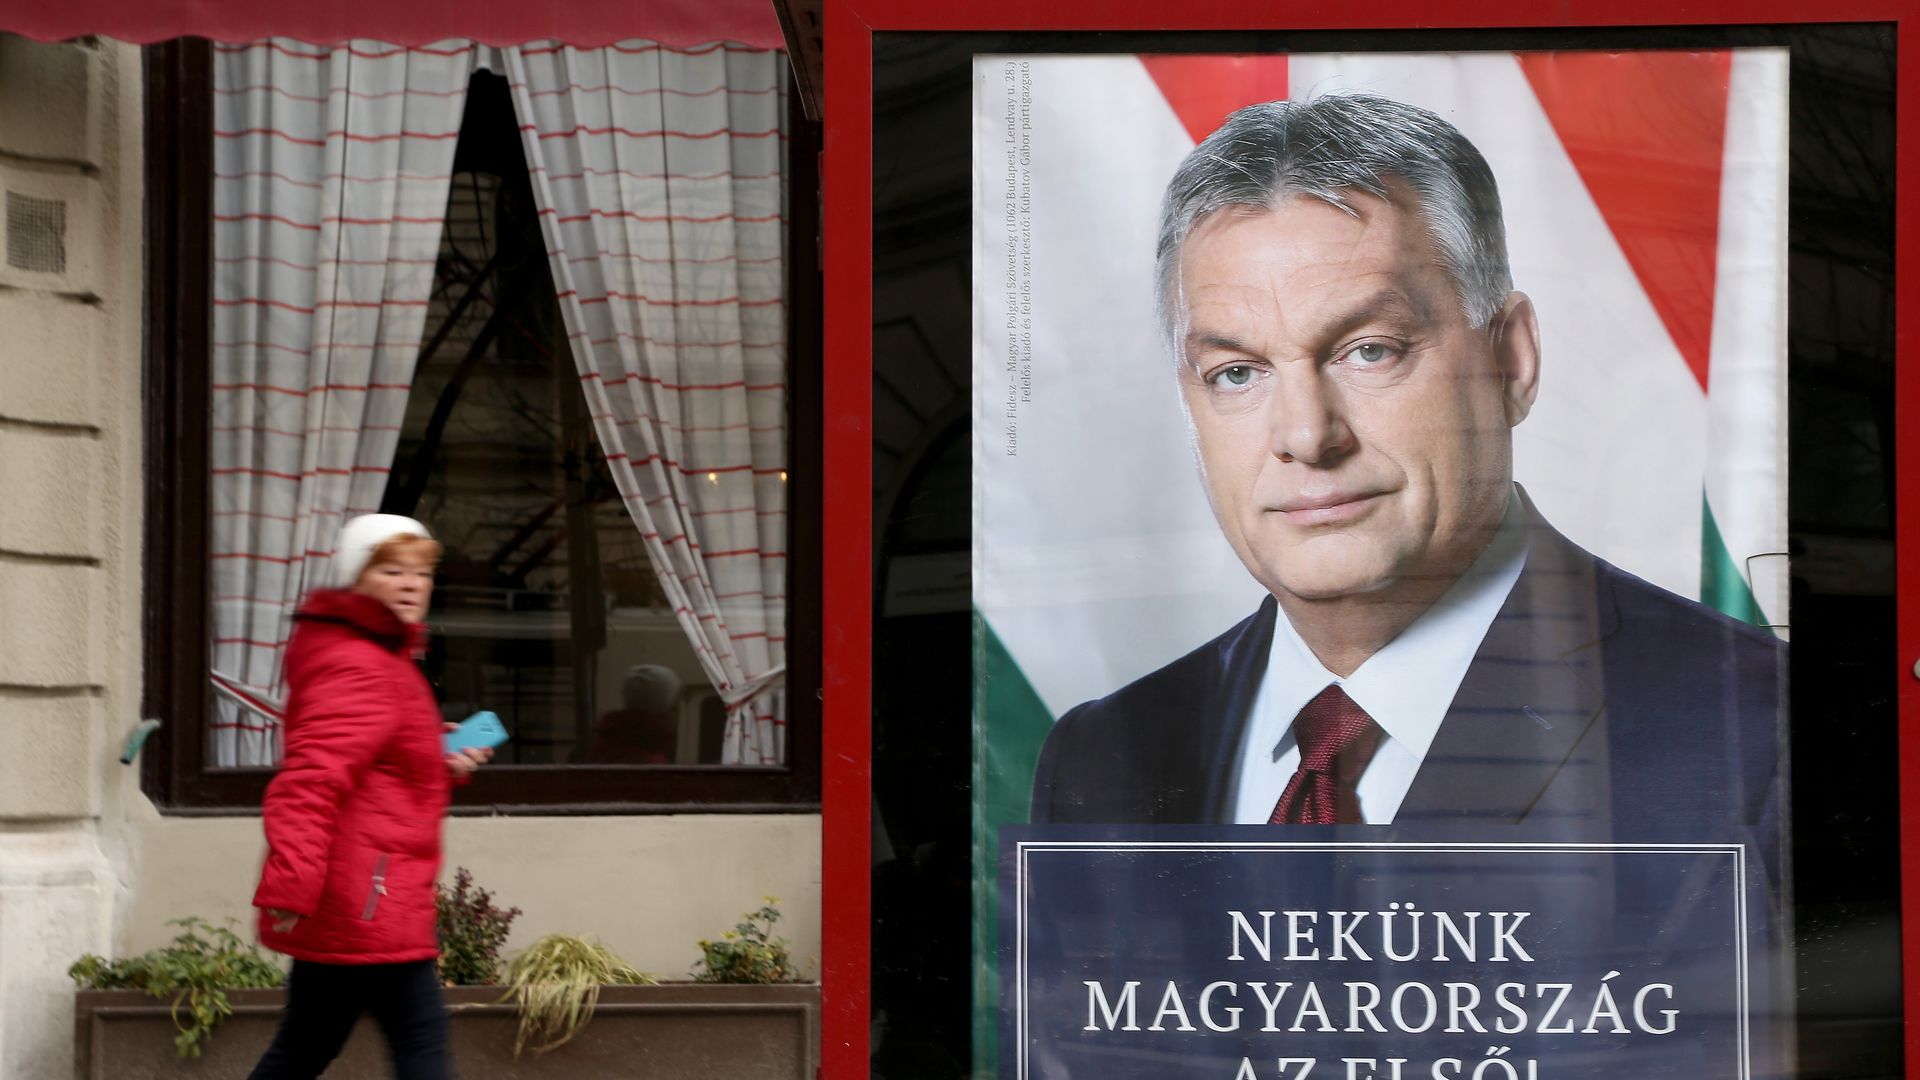 A poster featuring Hungarian Prime Minister Viktor Orban hangs prior to the upcoming Hungarian parliamentary elections on April 8, on March 17, 2018 in Budapest, Hungary.